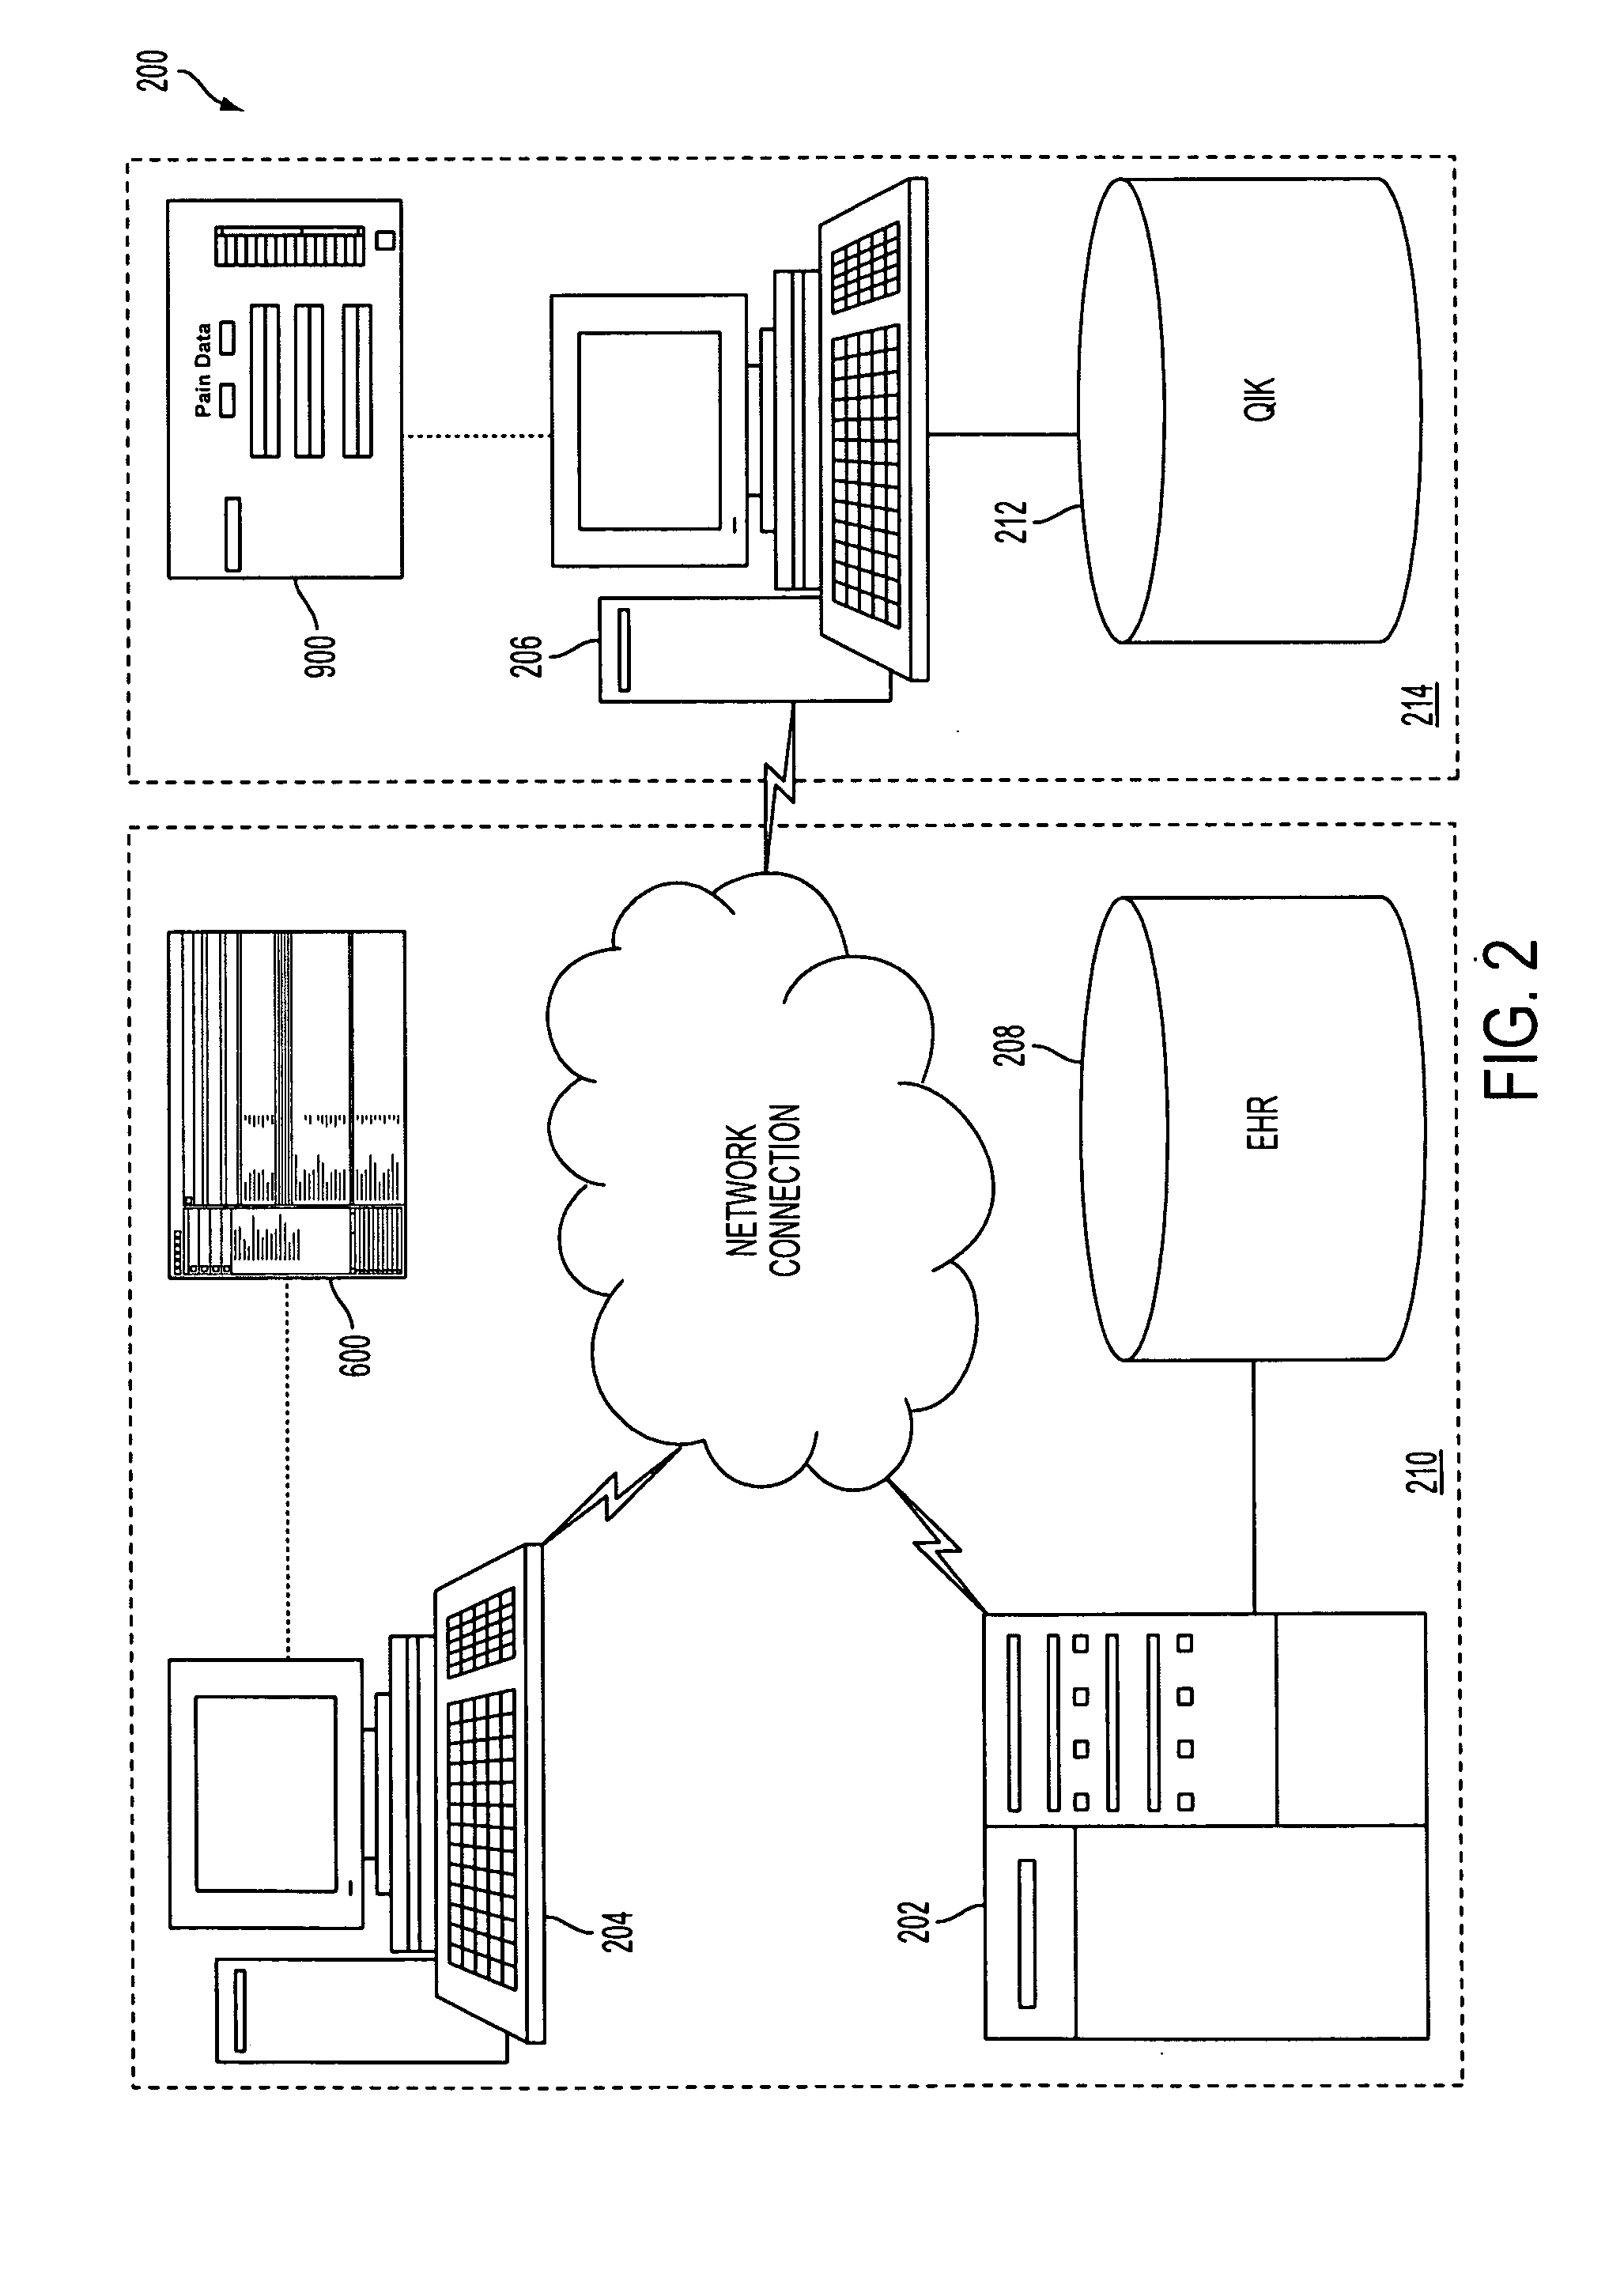 Apparatus and method for generating quality informatics knowledge